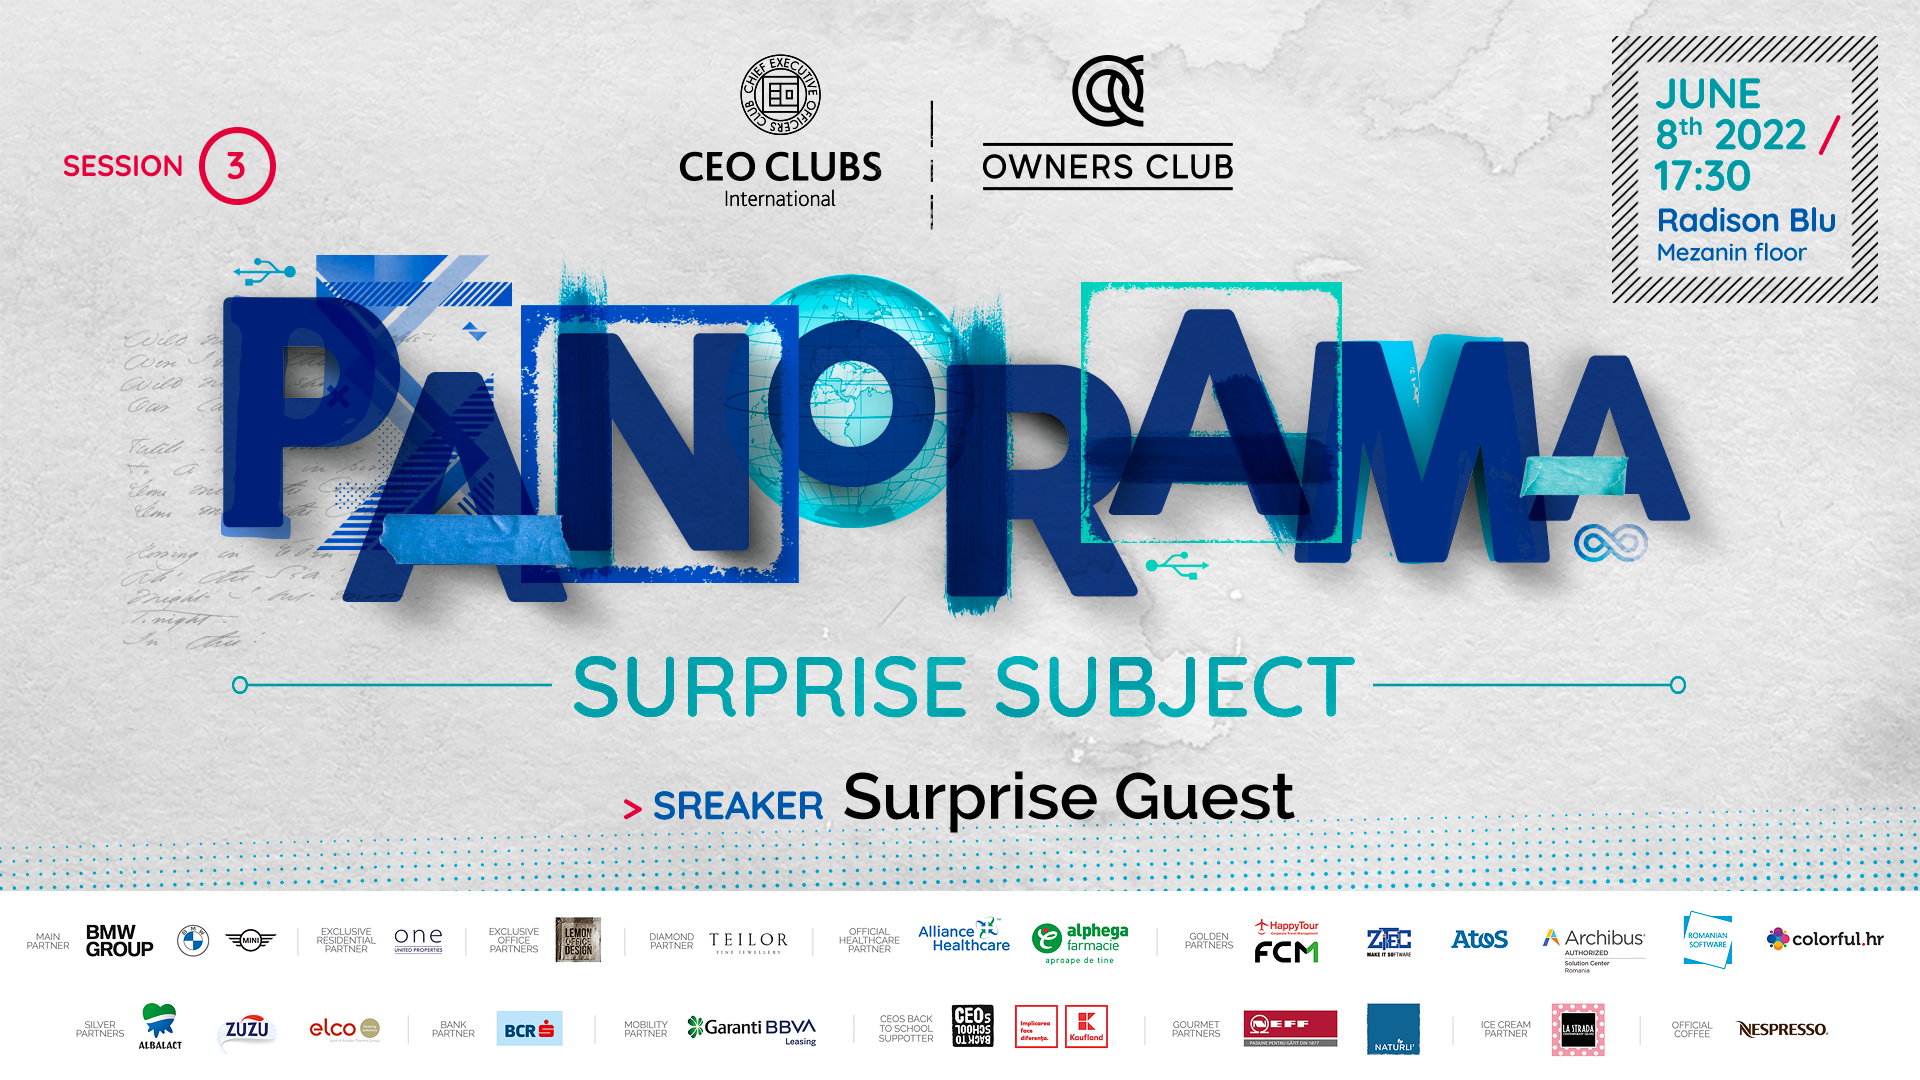 CEO Clubs & Owners Club Panorama: Surprise subject